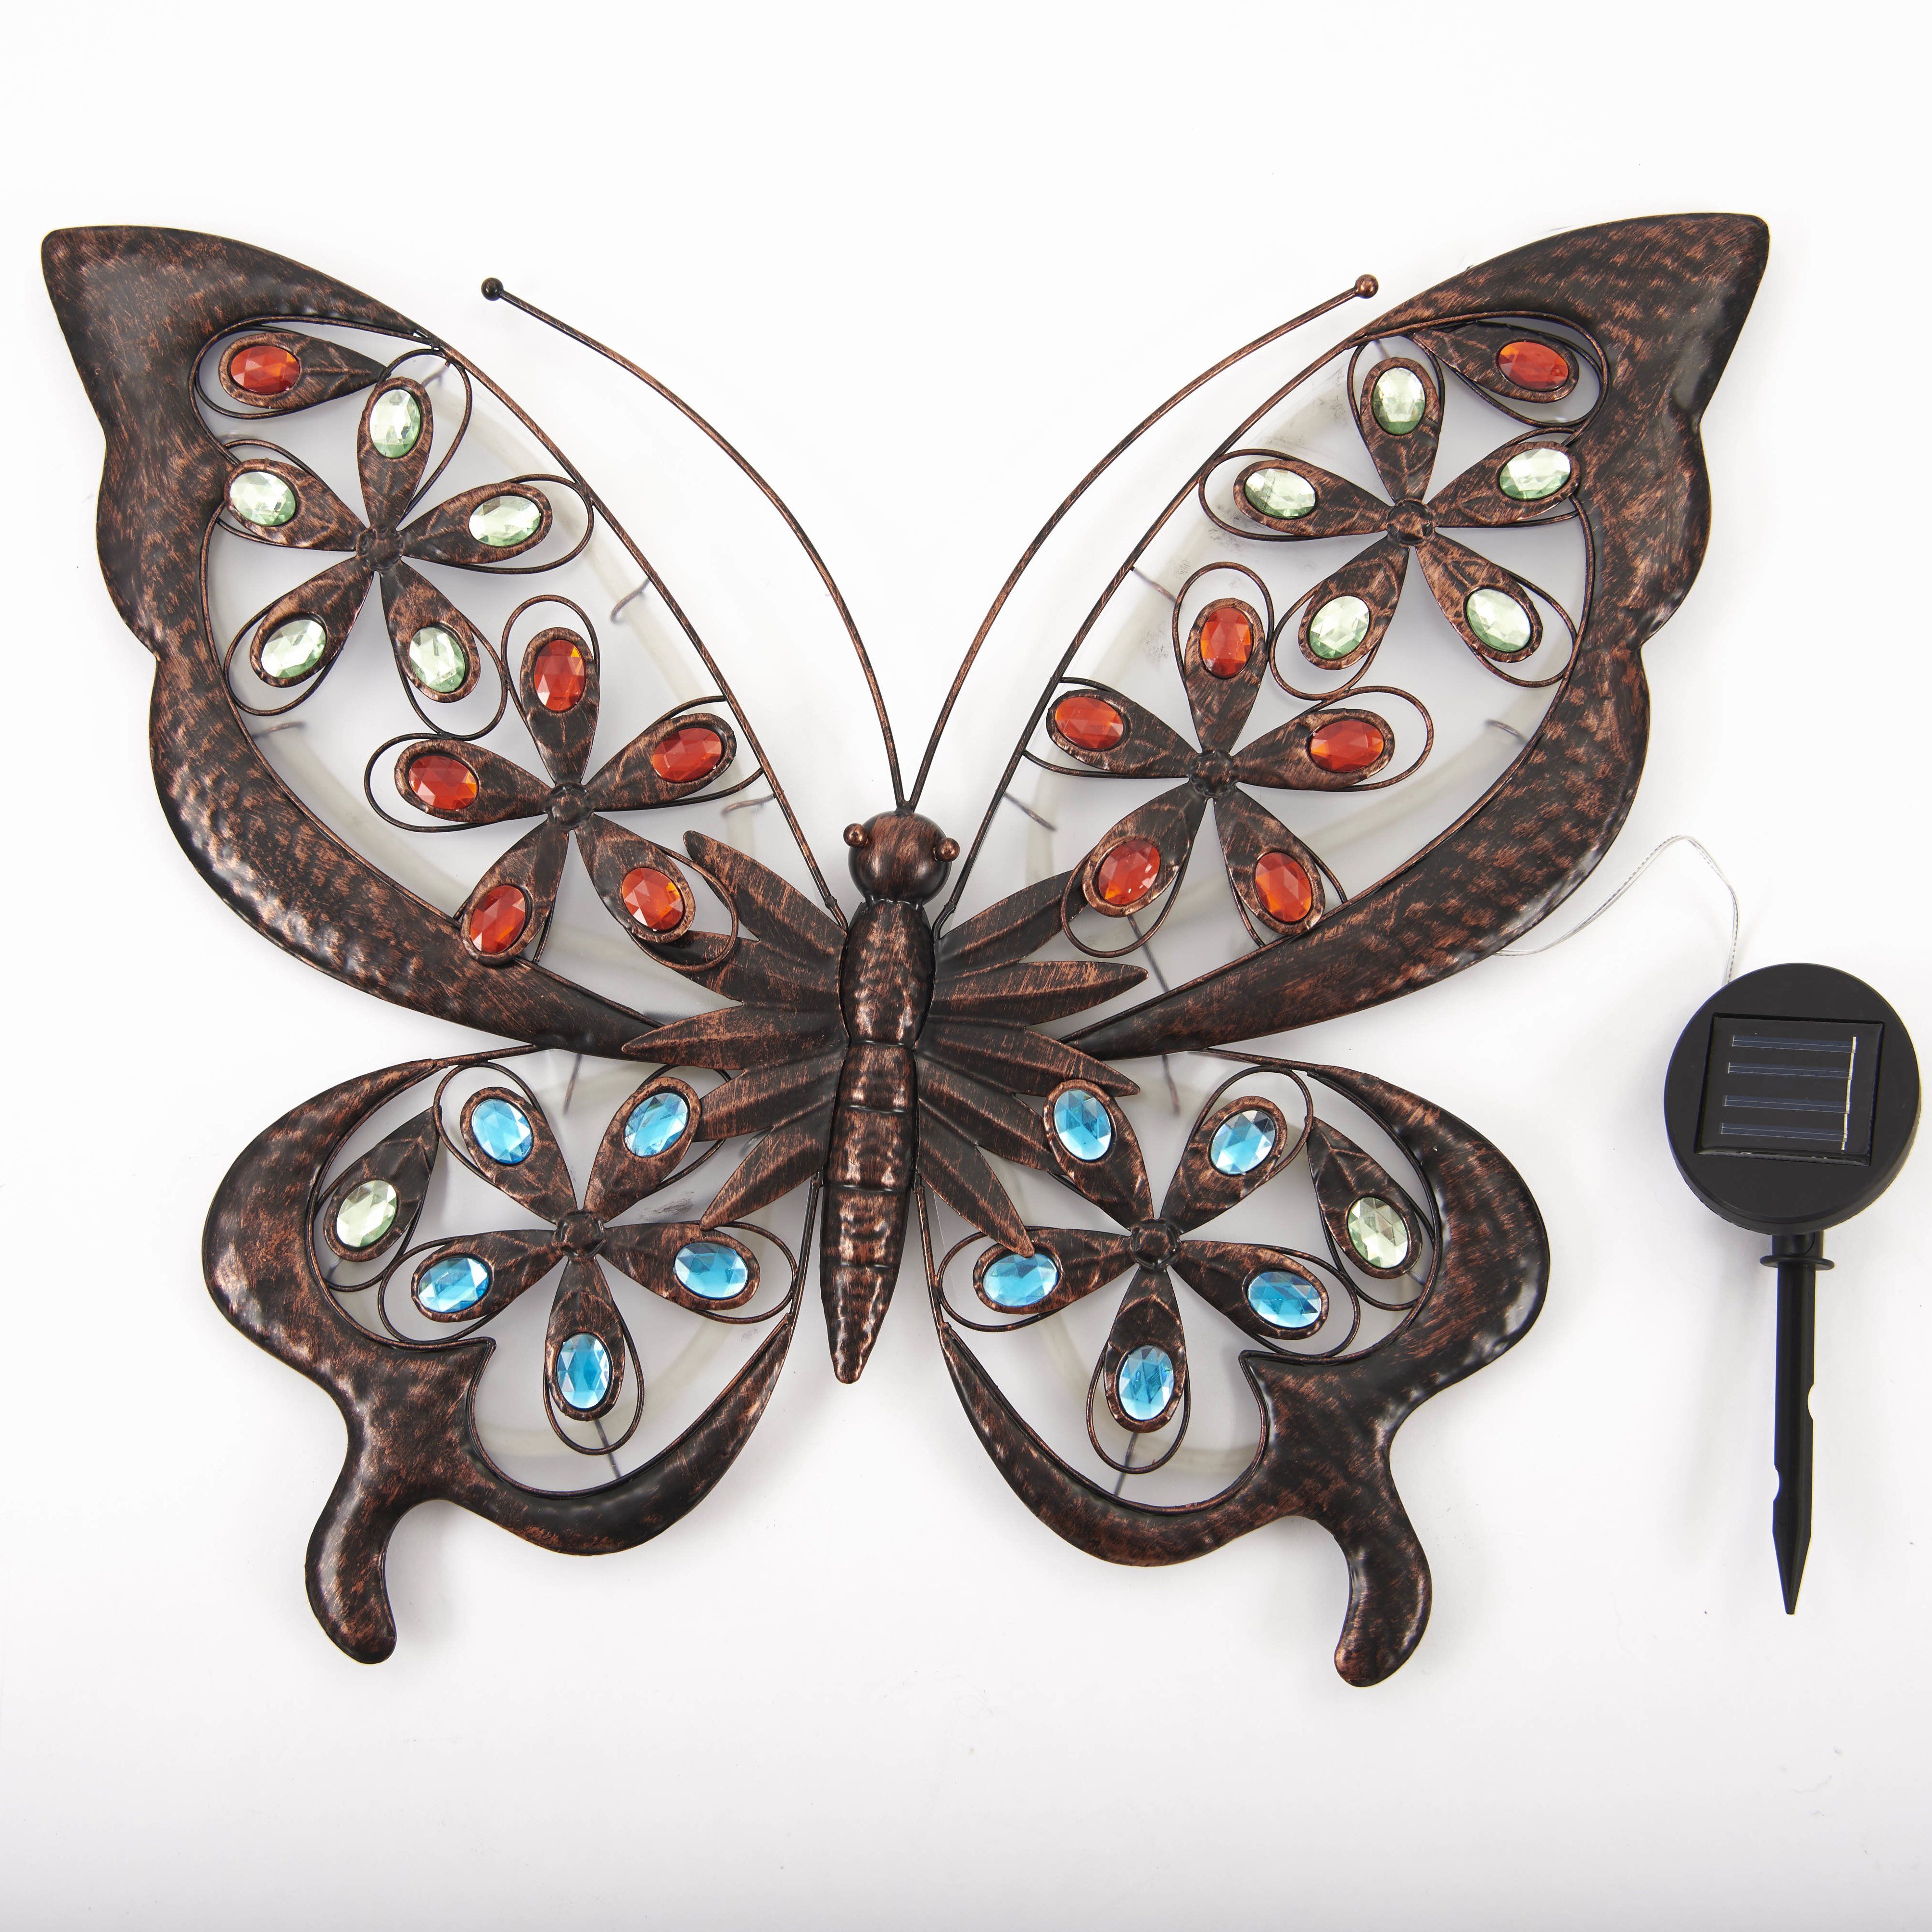 Most Popular Ila Metal Butterfly Wall Decor Pertaining To 25 Magnanimous Butterfly Wall Decor That Gives You Pleasure (View 10 of 20)